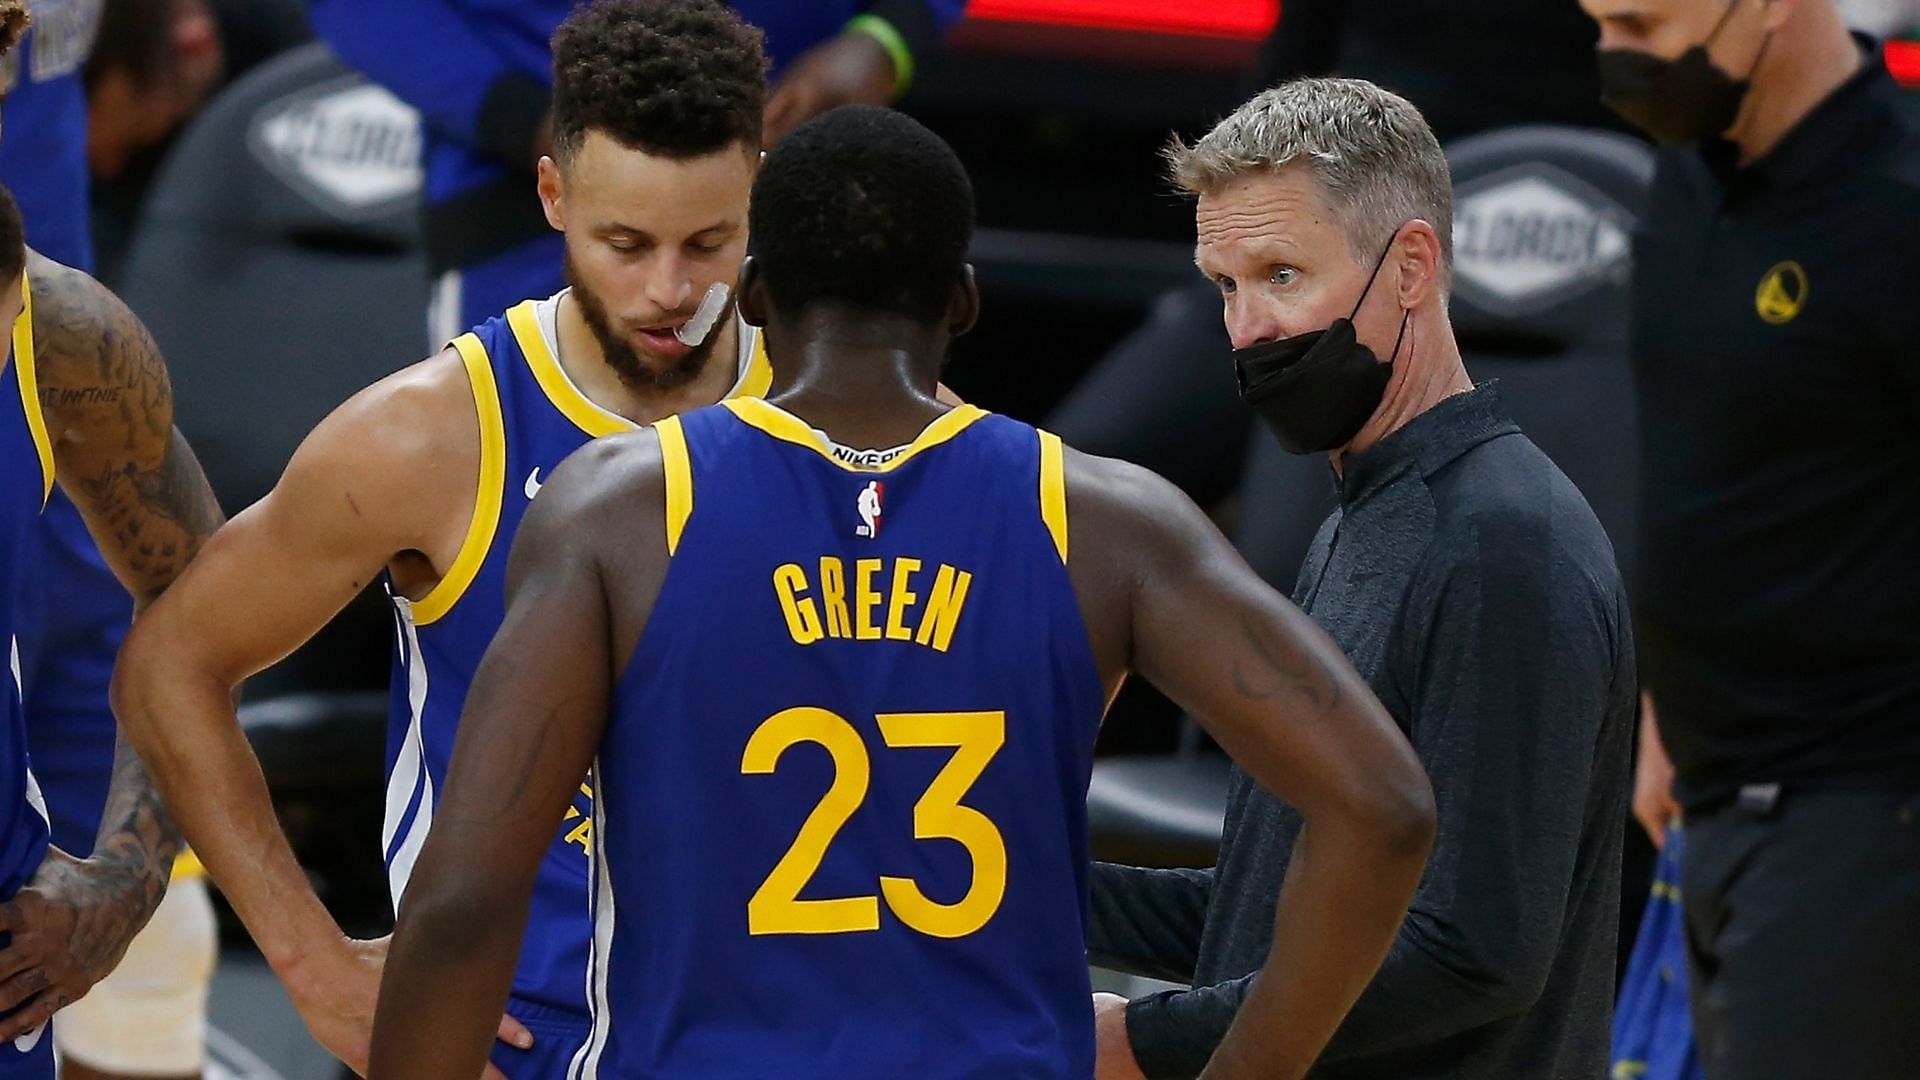 Steve Kerr has never been reluctant or afraid to coach hard his Golden State Warriors superstars. [Photo: Sporting News]